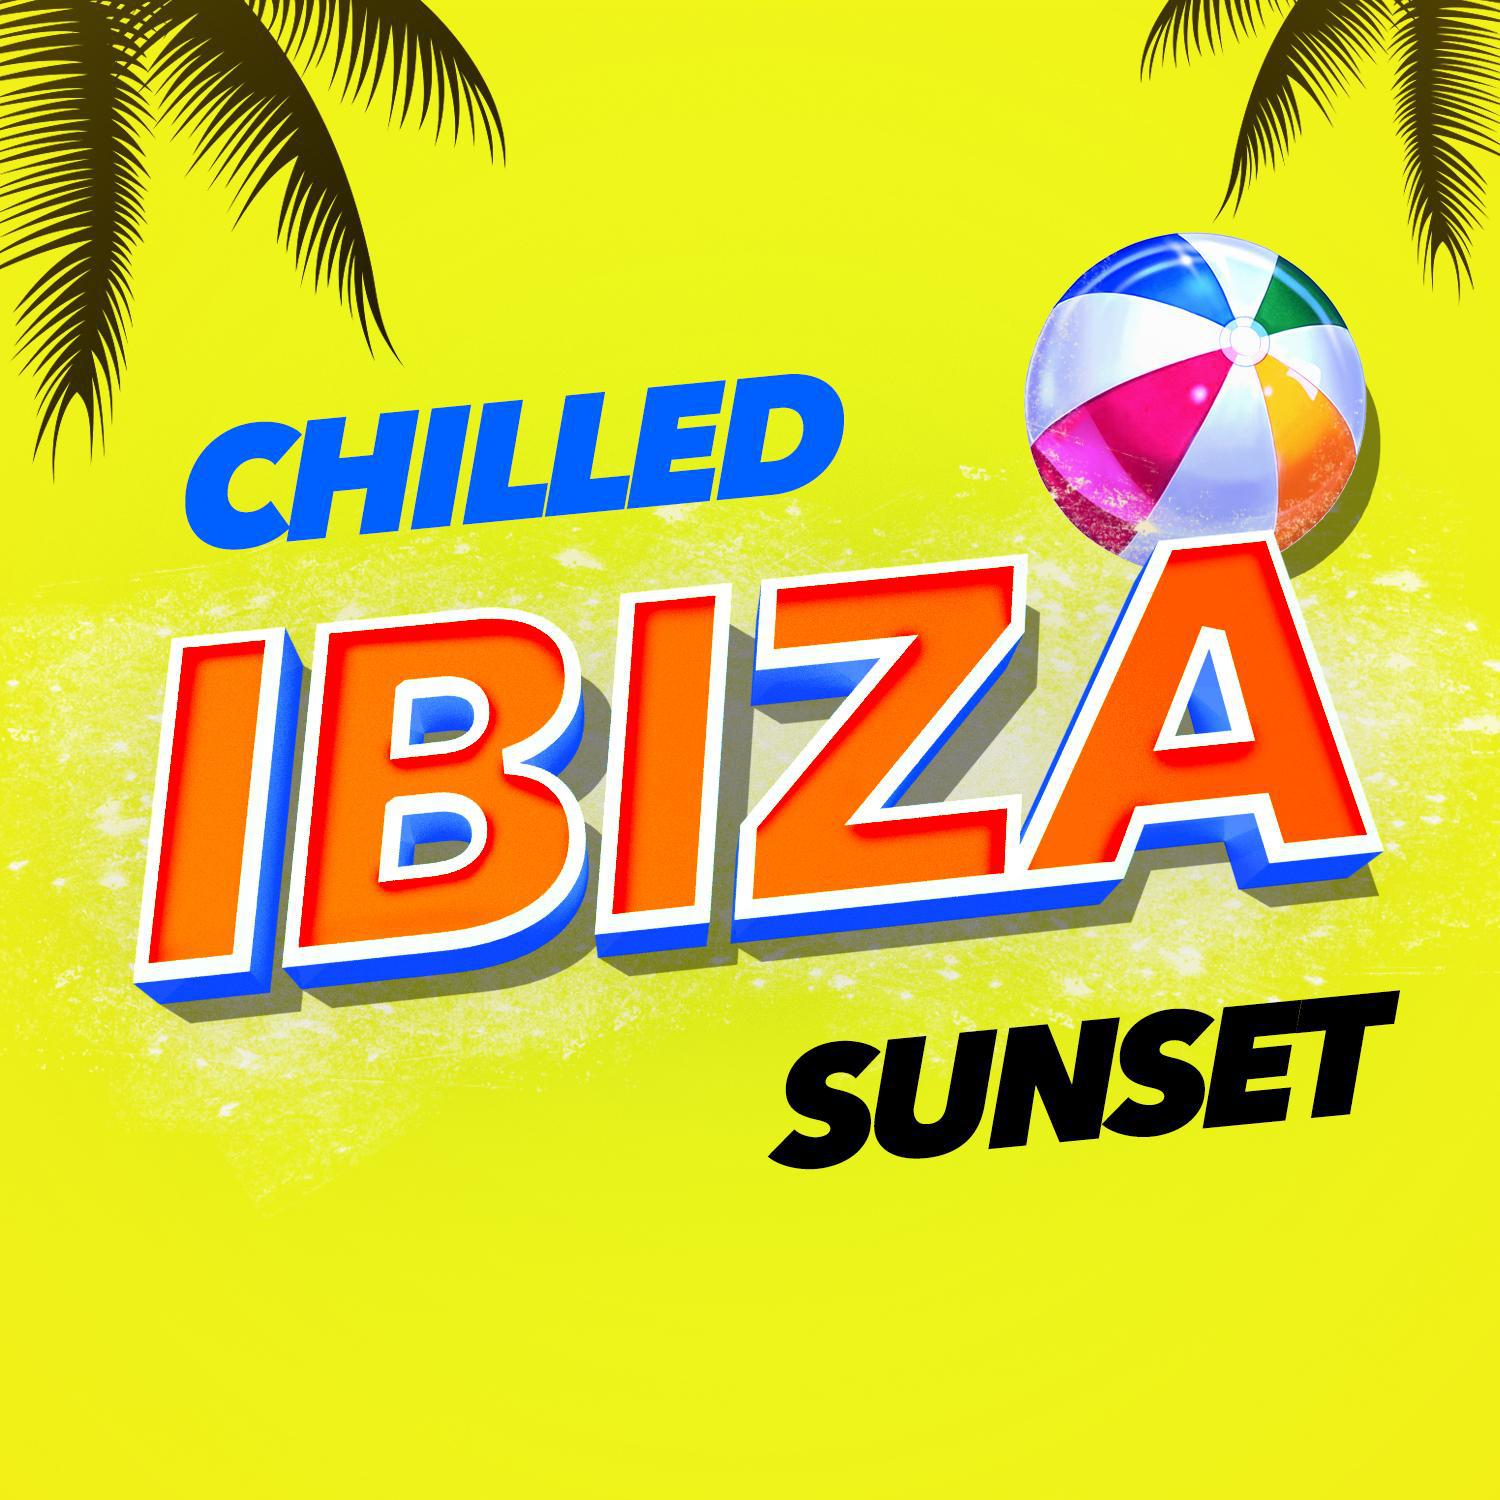 Chilled Ibiza - What's Your Name